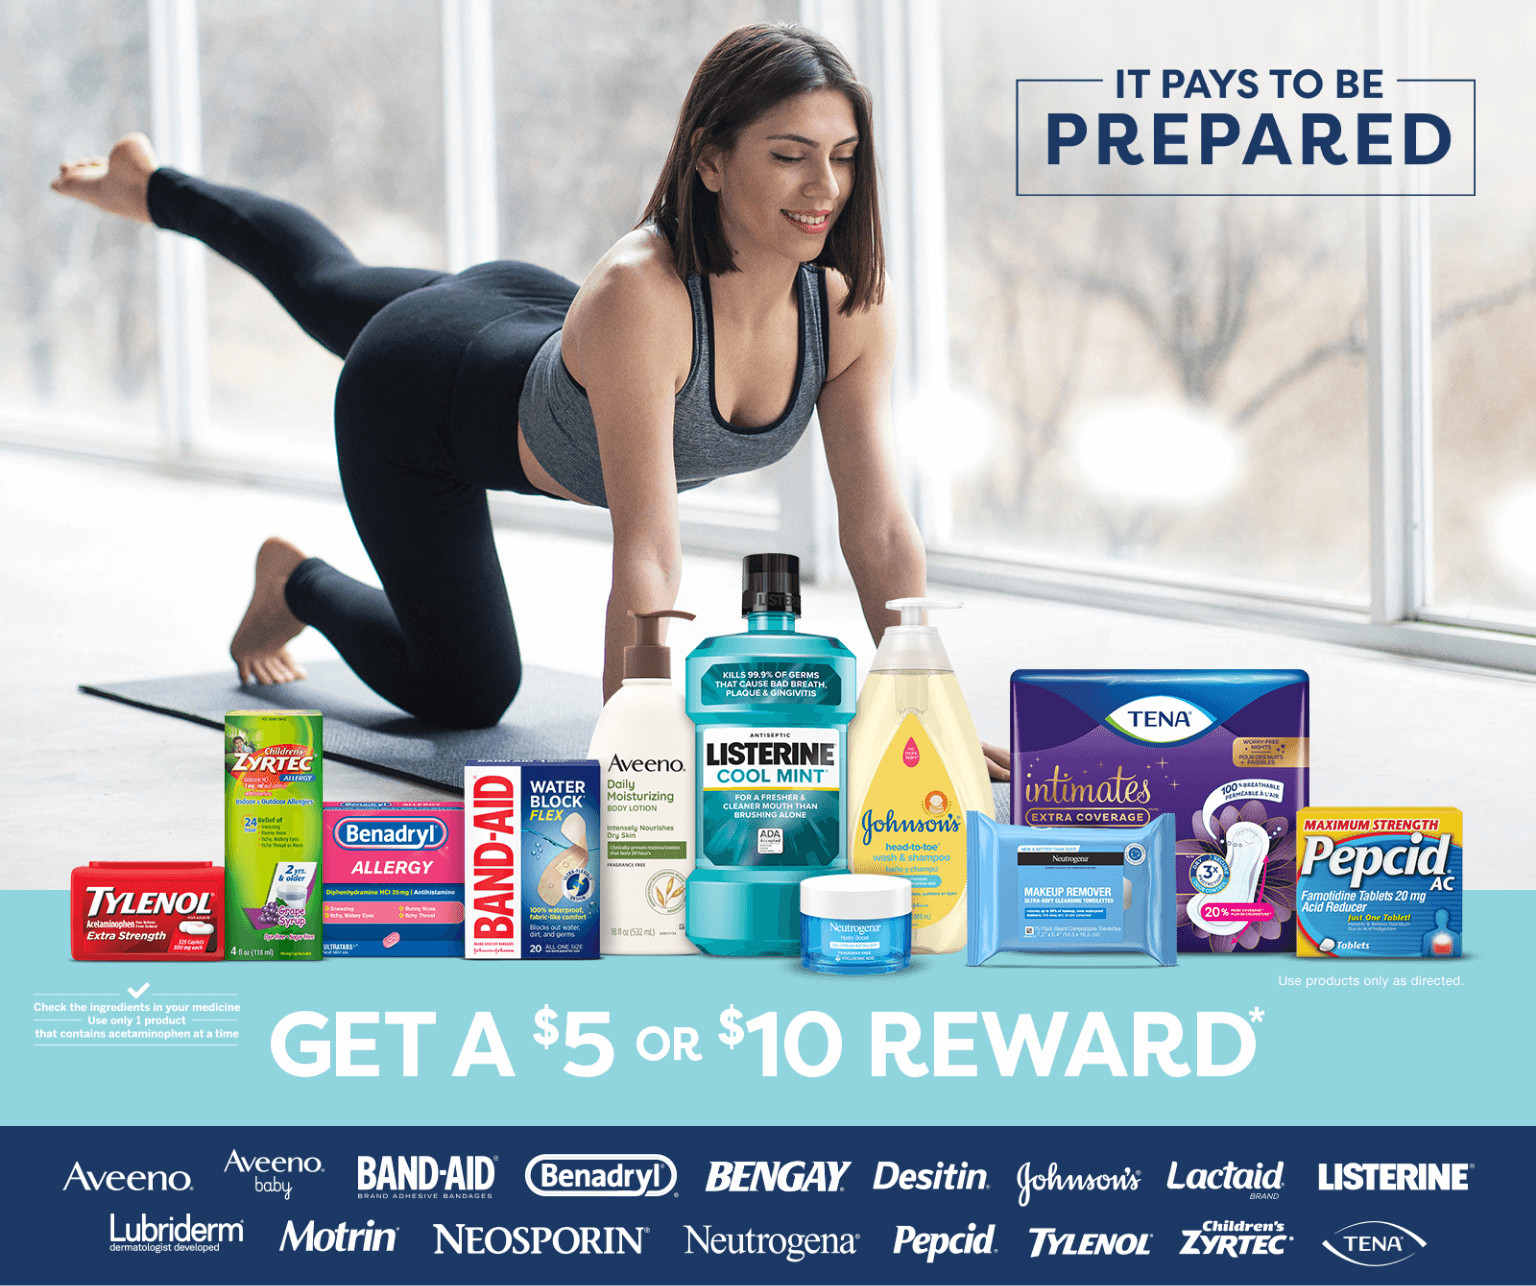 Sam's Club & possibly other retailers, Spend $20, get $5 reward, Spend $30 get $10 reward on participating products, paid as Visa rewards card or egift card or VUDU/Fandango code